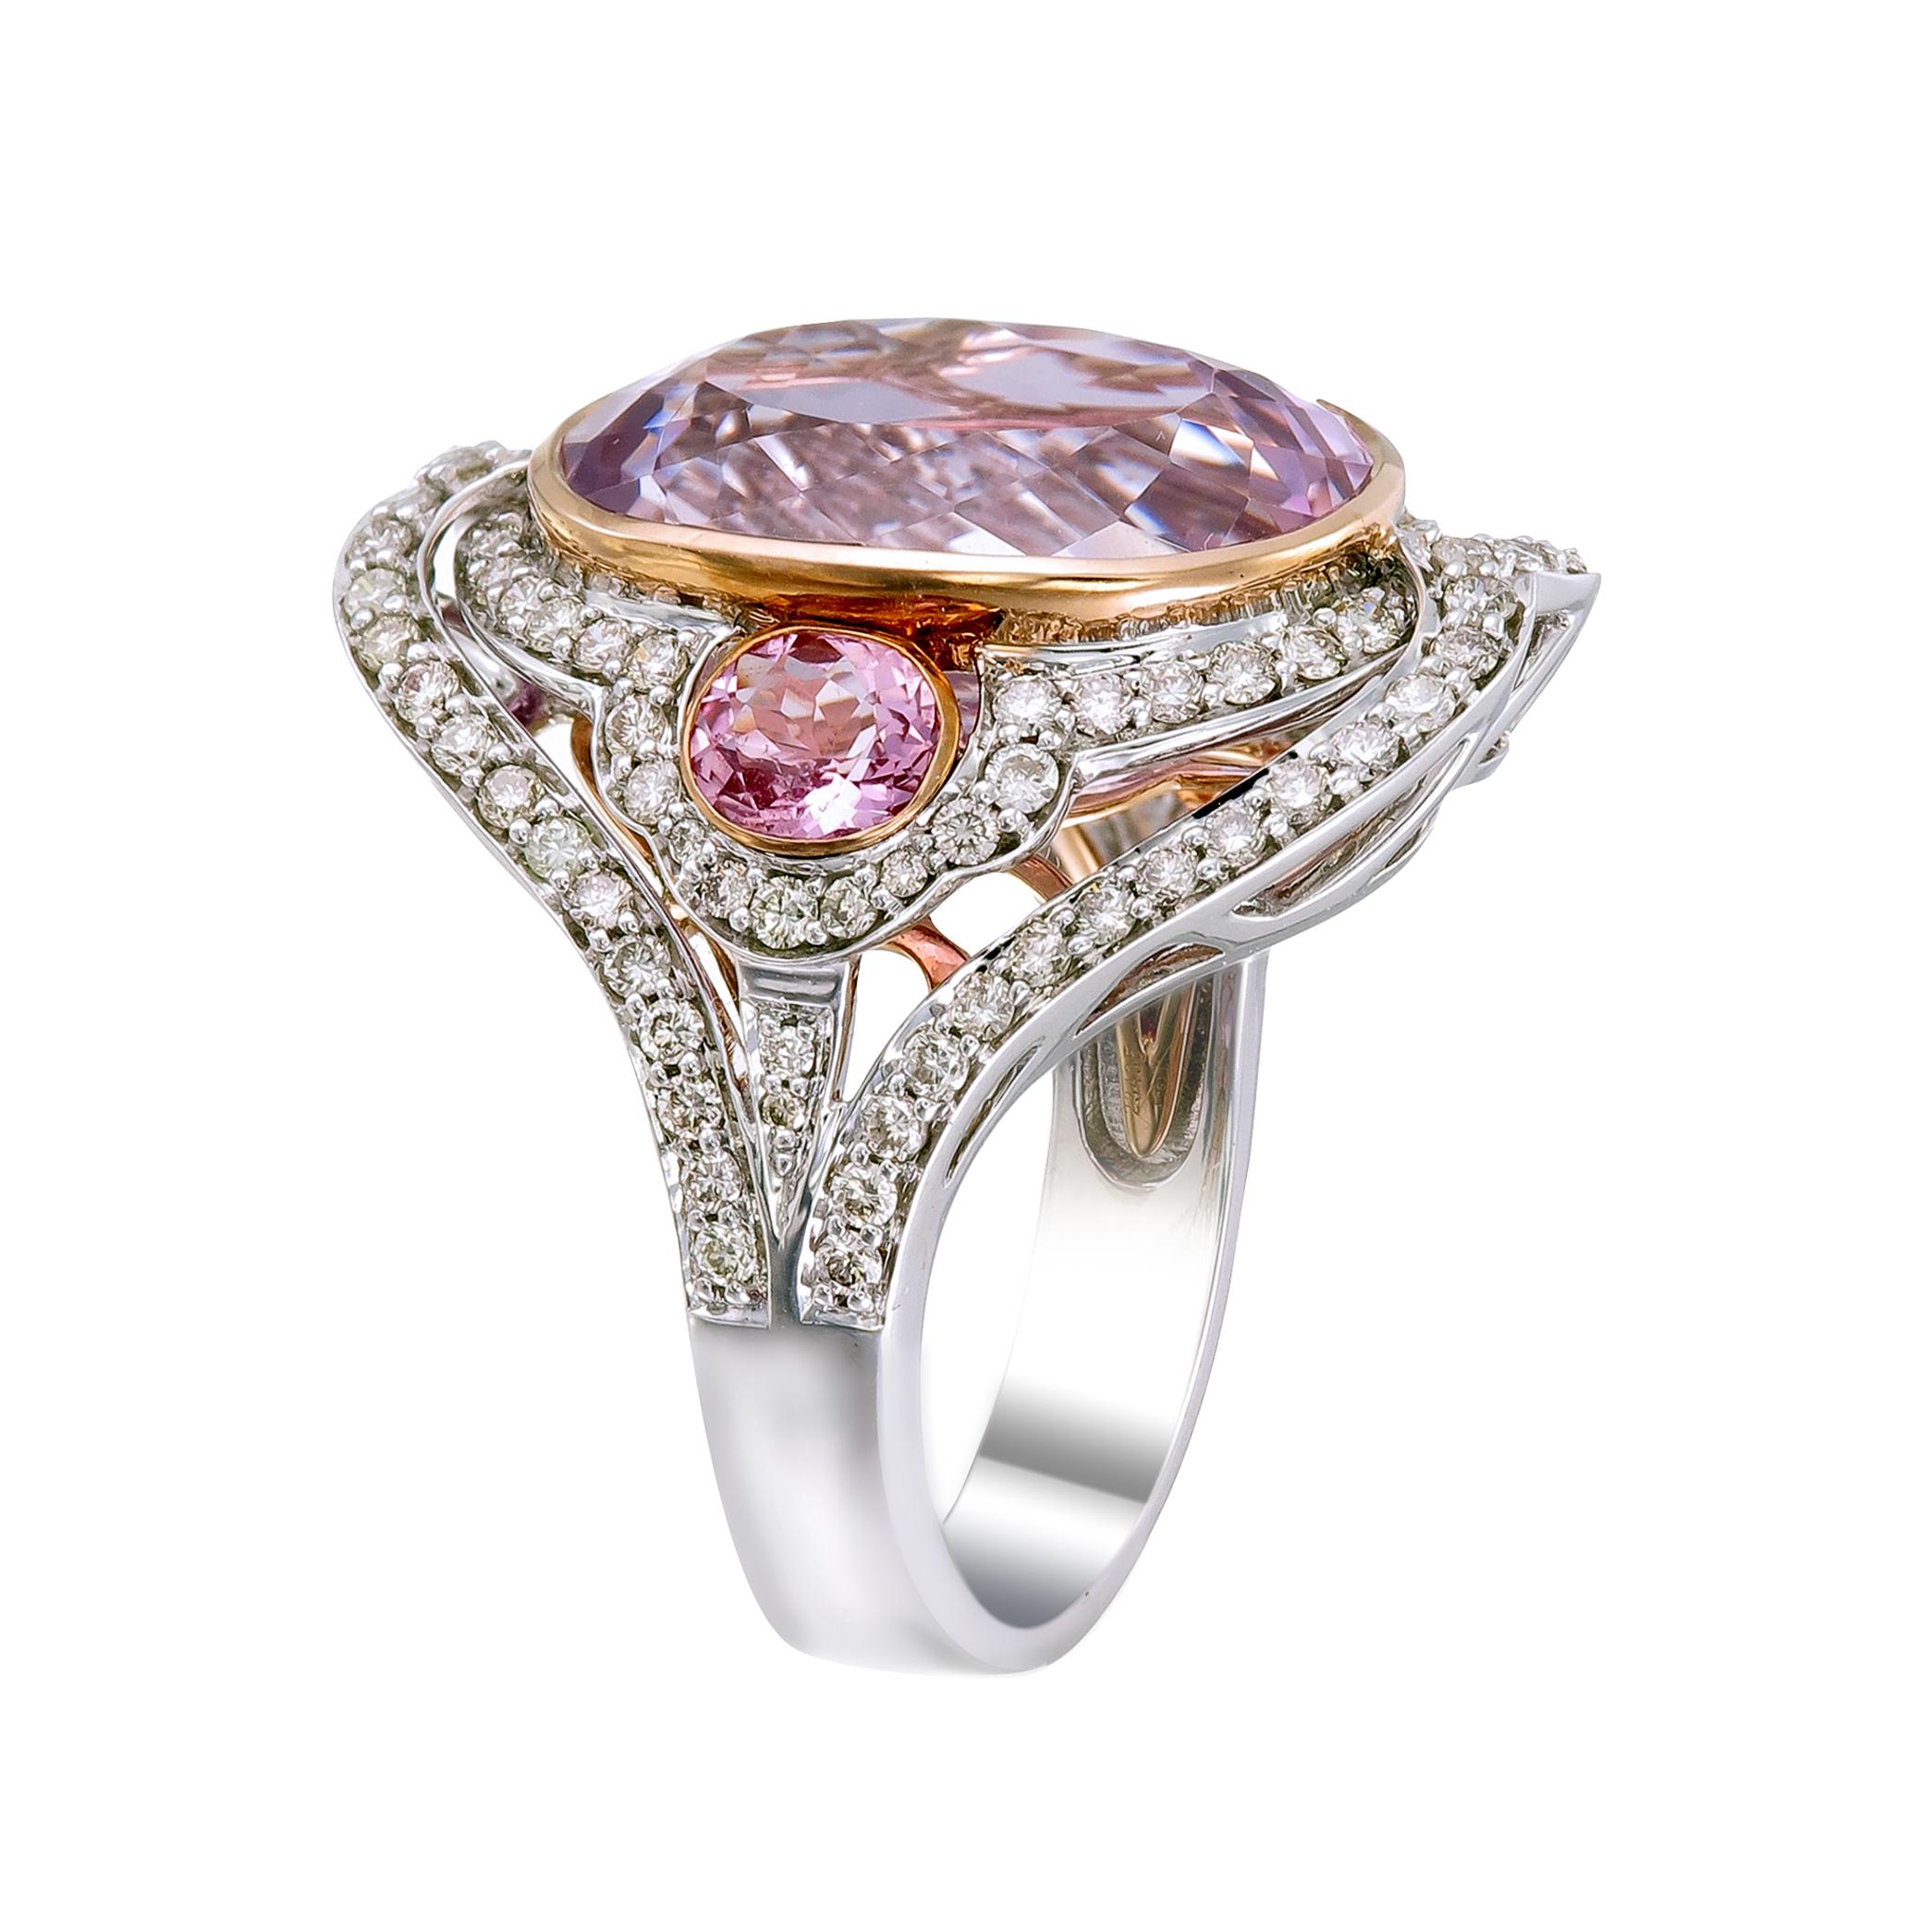 If pink is your color you will love this 18k white gold and palladium ring centered with a 14-carat pink Kunzite flanked by two 0.86-carat pink tourmalines lined with 1.04-carat diamonds. This finely crafted jewel is further defined with a personal